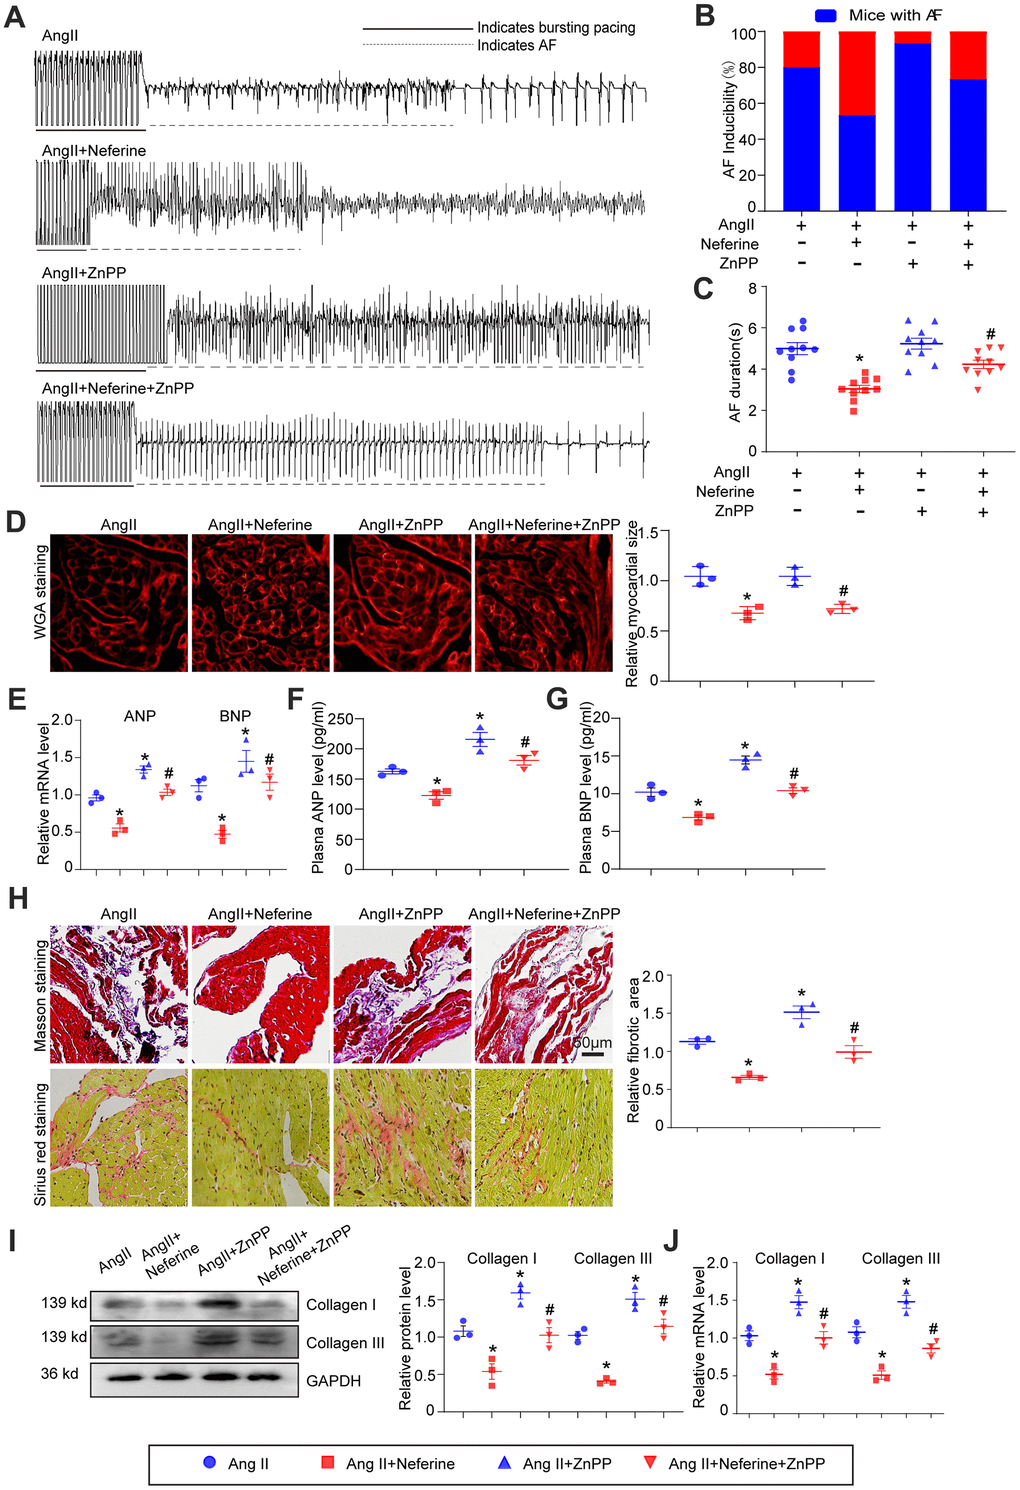 Inhibition of HO-1 partially abolished the protective role of neferine in Ang II-induced AF, atrial cell size augmentation, and fibrosis. (A) AF records in each group. (B, C) Average AF incidence and duration induced by burst pacing (n = 10). (D) Representative images of WGA staining of atrial sections illustrating atrial cell size, with the cell area in each group quantified (n = 3, on the right). Scale bar: 50 μm. (E) Measurement of ANP and BNP mRNA levels by qPCR (n = 3, on the right). (F, G) Plasma ANP and BNP levels assessed by Elisa kit (n = 3). (H) Representative images of Masson's trichrome and Sirius Red-stained atrial sections indicating the degree of fibrosis, with the fibrotic area in each group quantified (n = 5, on the right). Scale bar: 50 μm. (I) Western blot analysis of collagen I and III protein expression in the atria, with the corresponding statistical results on the right (n = 3). (J) Measurement of collagen I and III mRNA levels by qPCR (n = 3). Data are presented as mean ± SEM, and n represents the number of samples. Data are presented as mean ± SEM, and n represents the number of samples. *P #P 